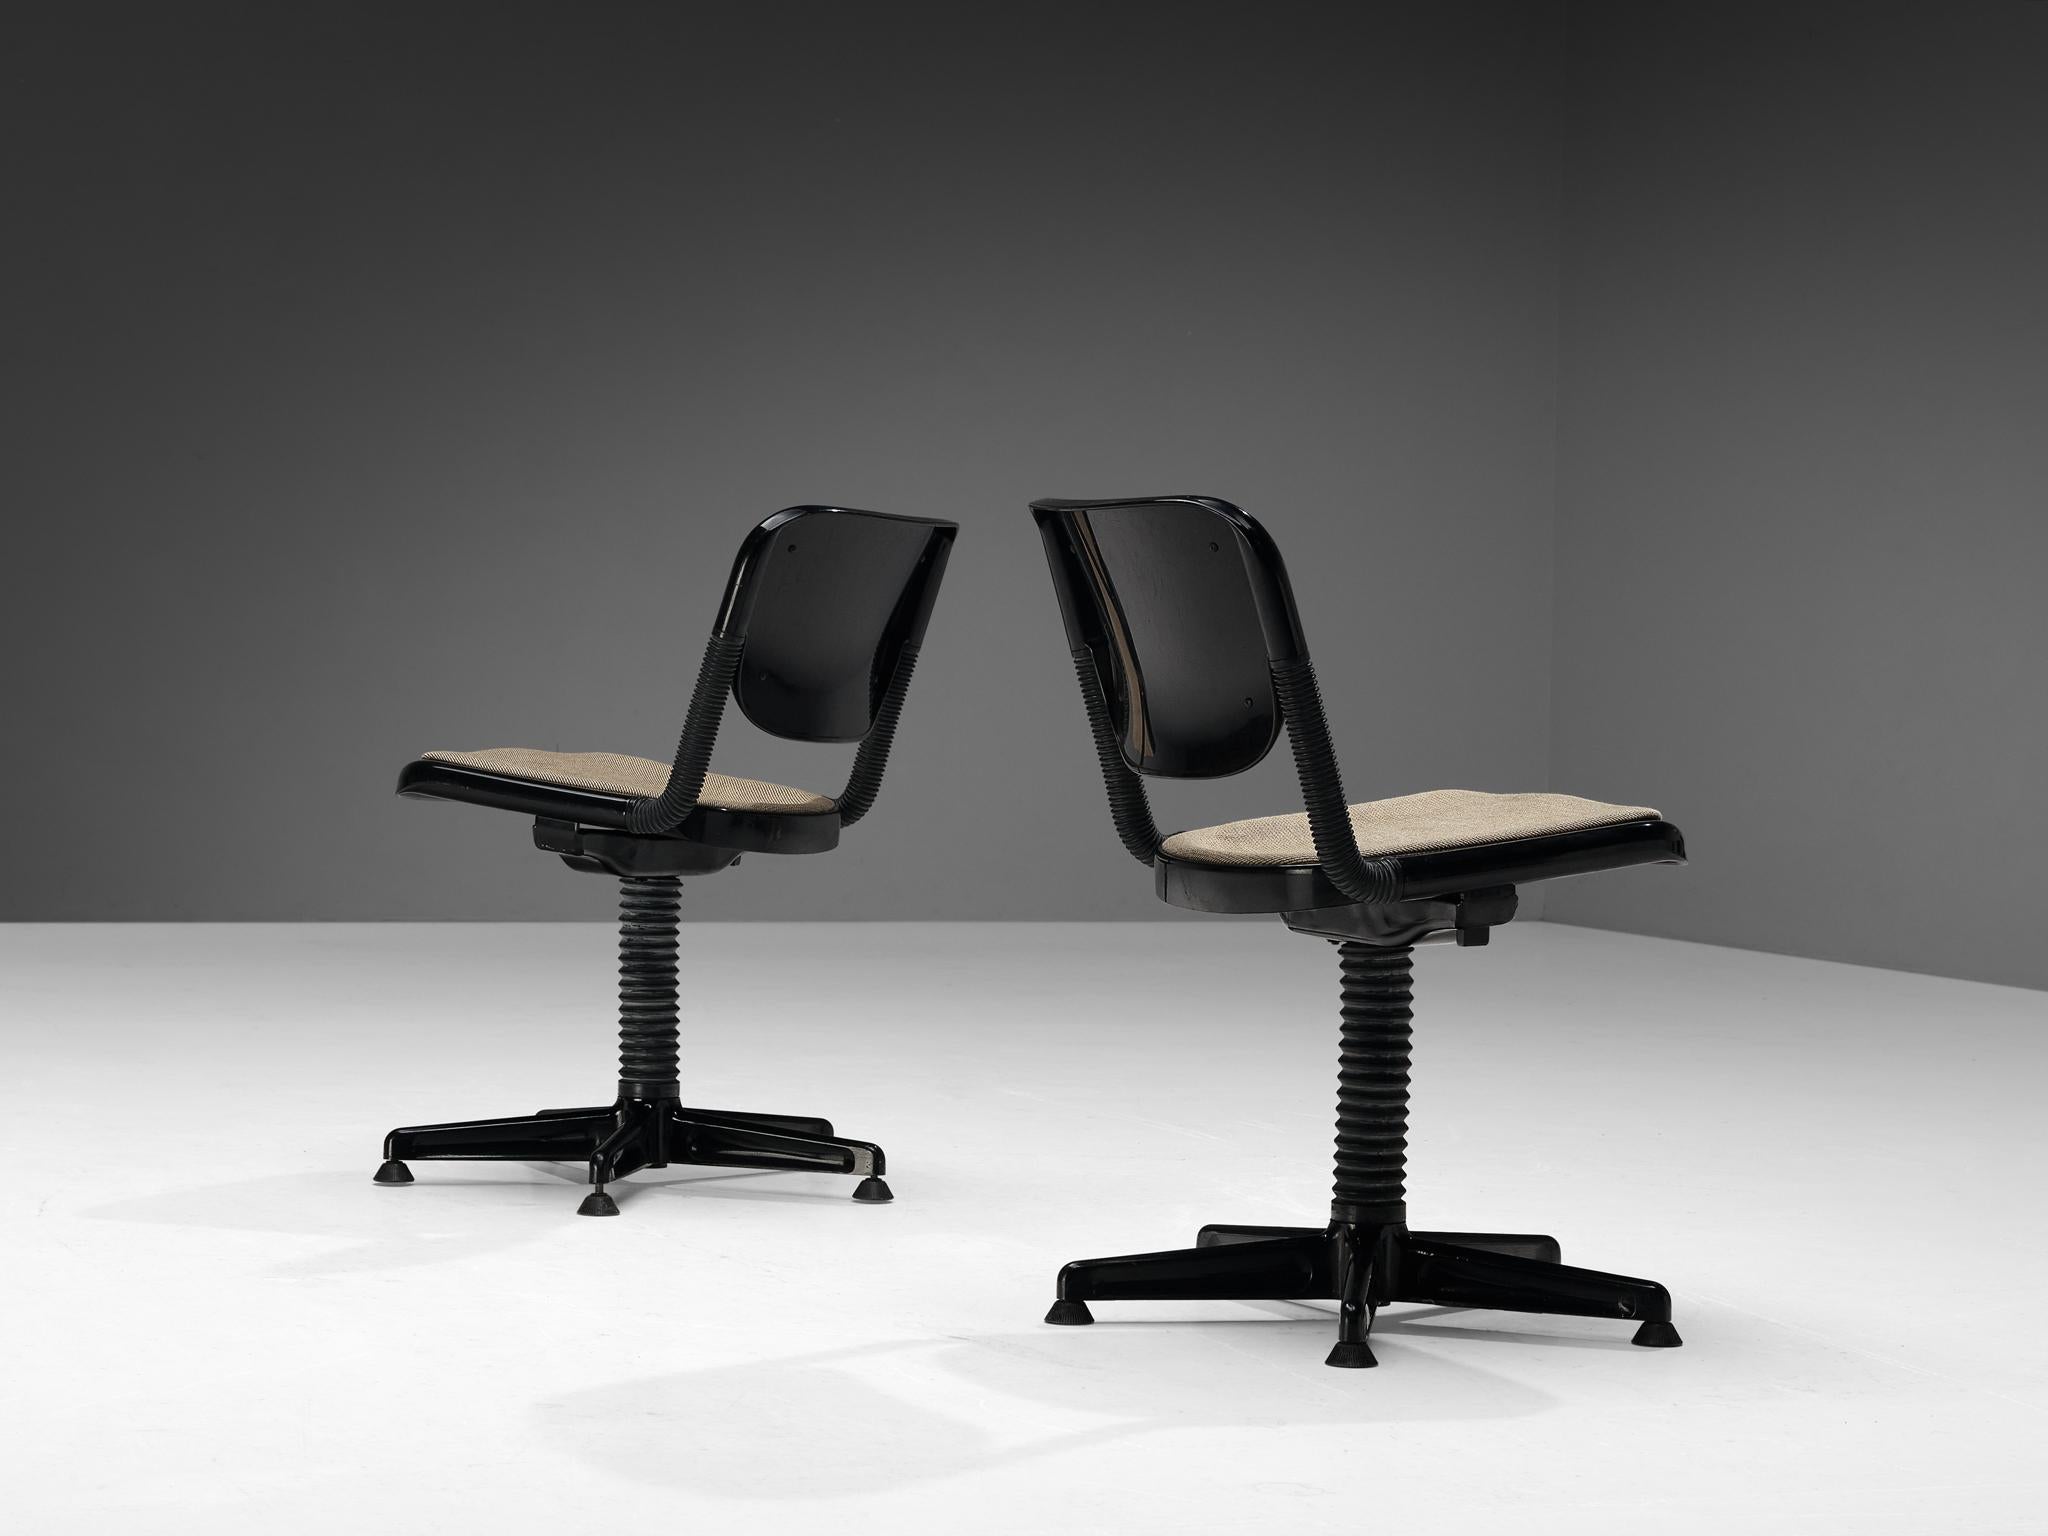 Emilio Ambasz & Giancarlo Piretti, desk chairs, plastic, fabric, metal, Italy, 1976

Swivel desk chairs that are adjustable in height. The chairs are designed by the Italian designers Emilio Ambasz and Giancarlo Piretti. They are light in their